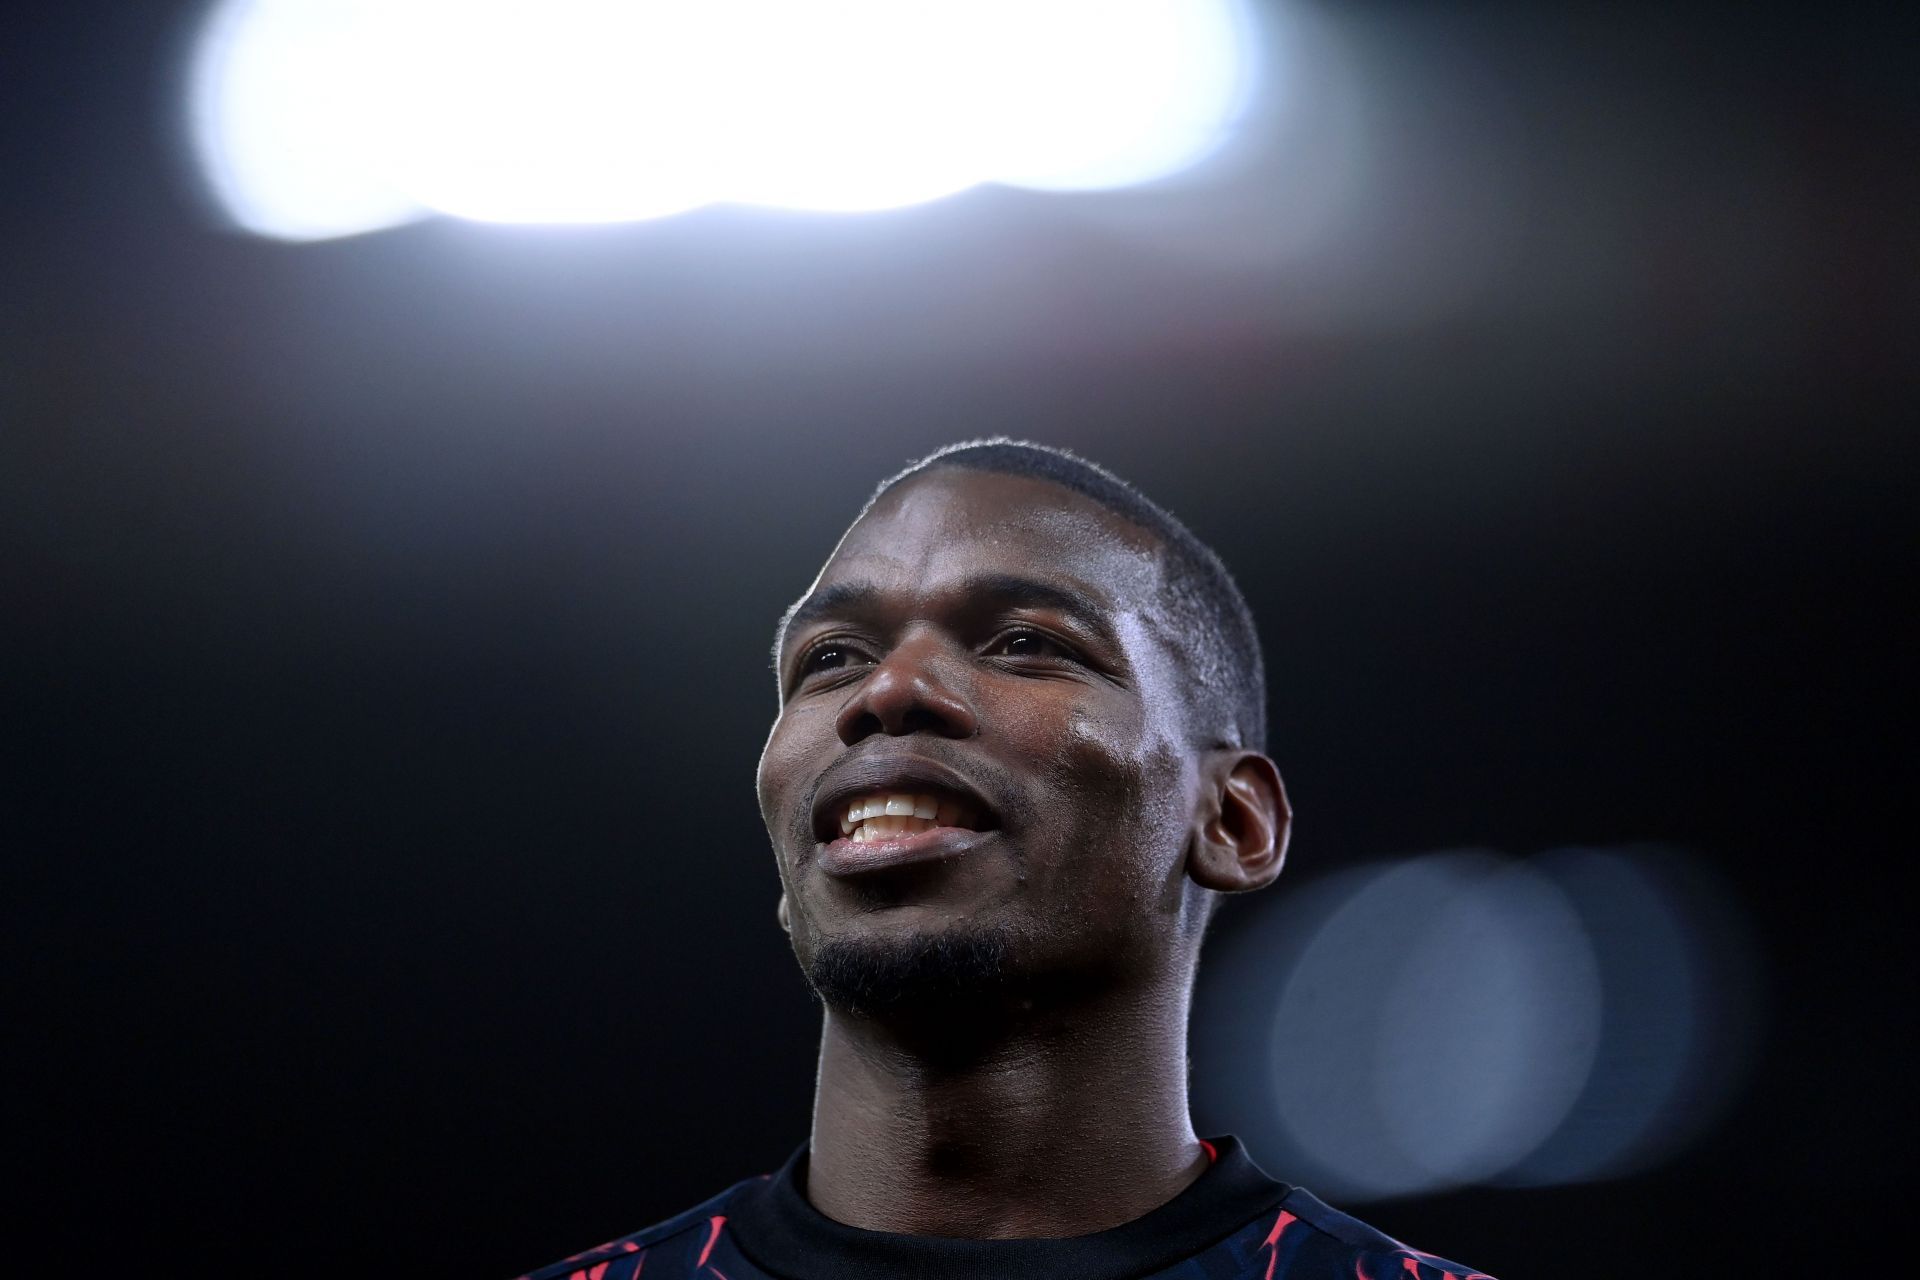 PSG are preparing a blockbuster contract to lure Paul Pogba away from Old Trafford.